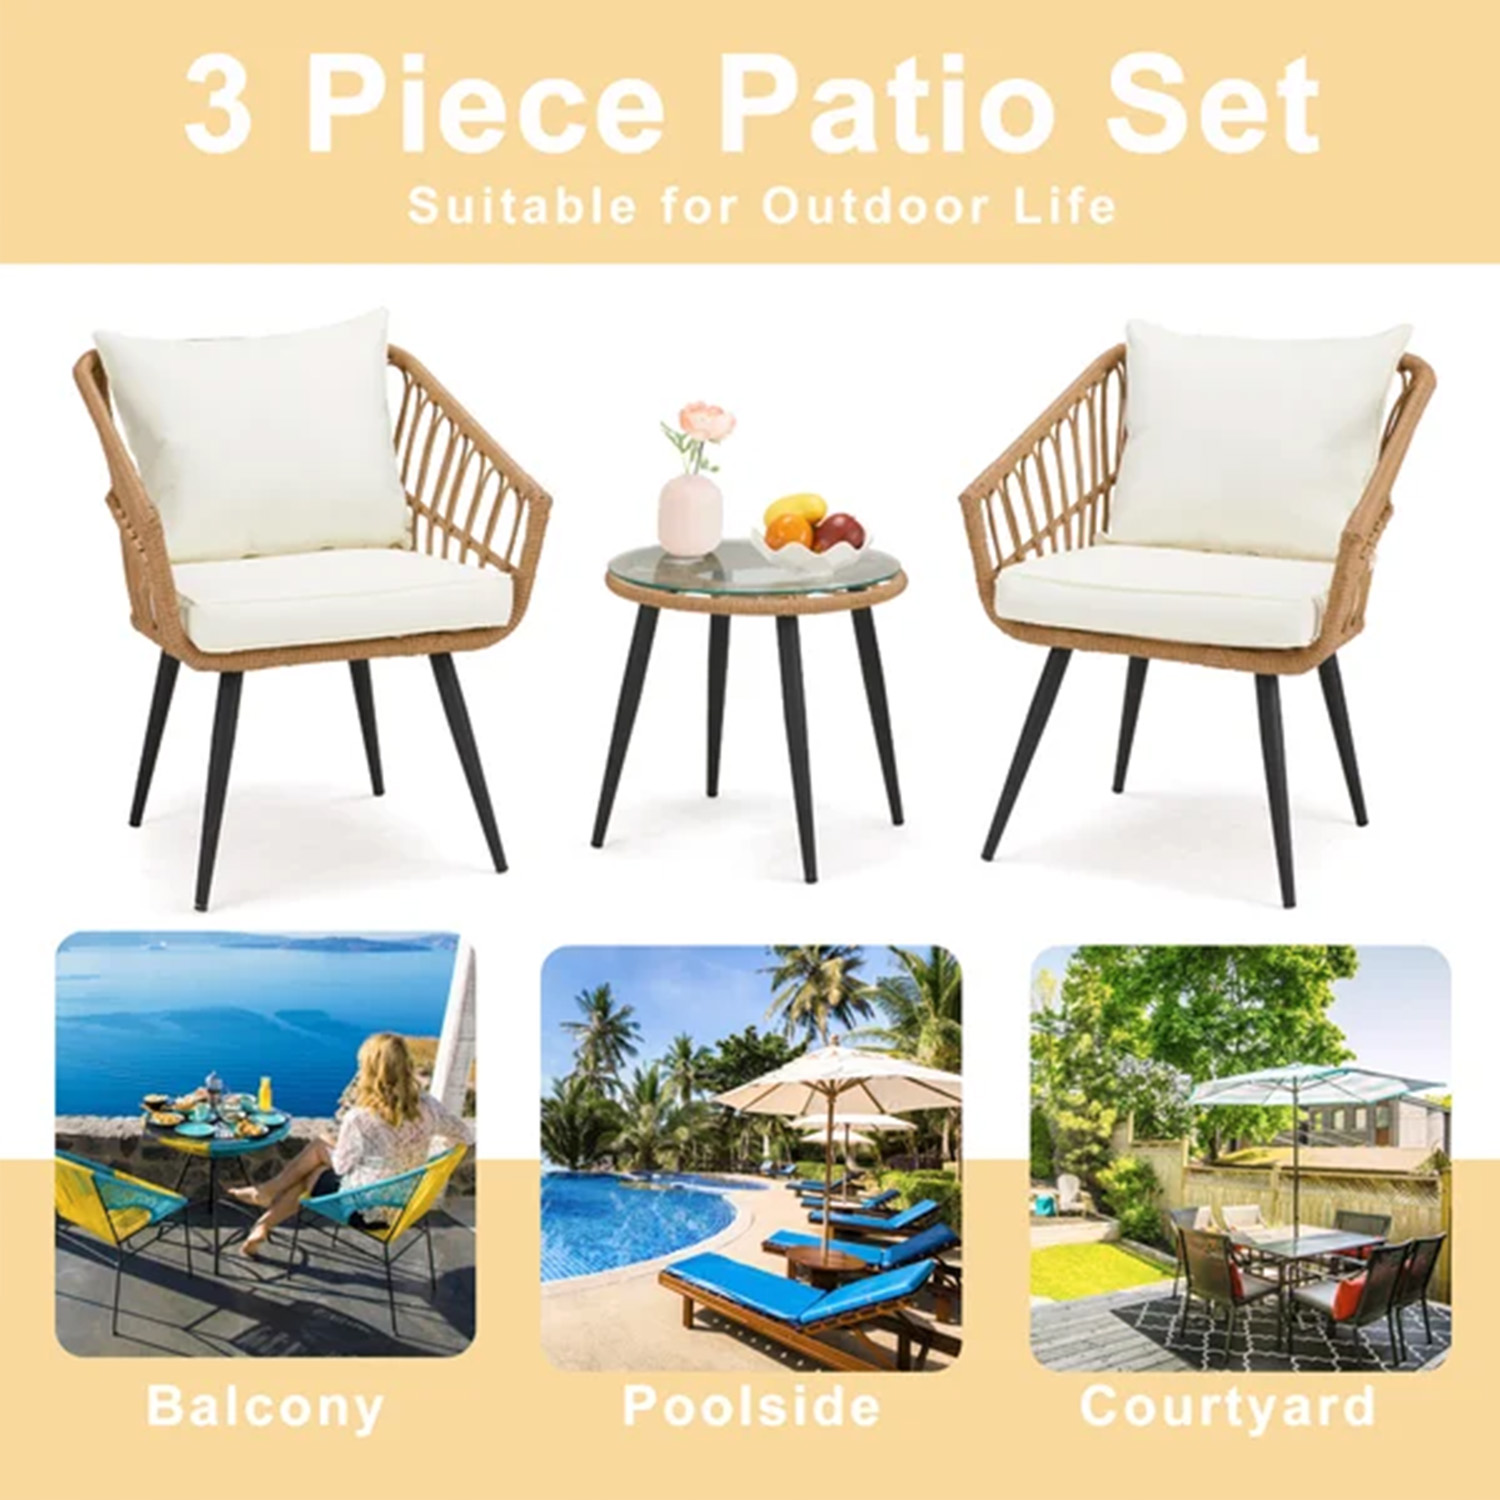 3 Pieces Patio Conversation Set Outdoor Furniture Wicker Rattan Chair with Cushions Bistro Sets Glass Top Coffee Side Table Seating Sectional Garden Balcony Backyard Poolside Sunroom Boho - image 4 of 7